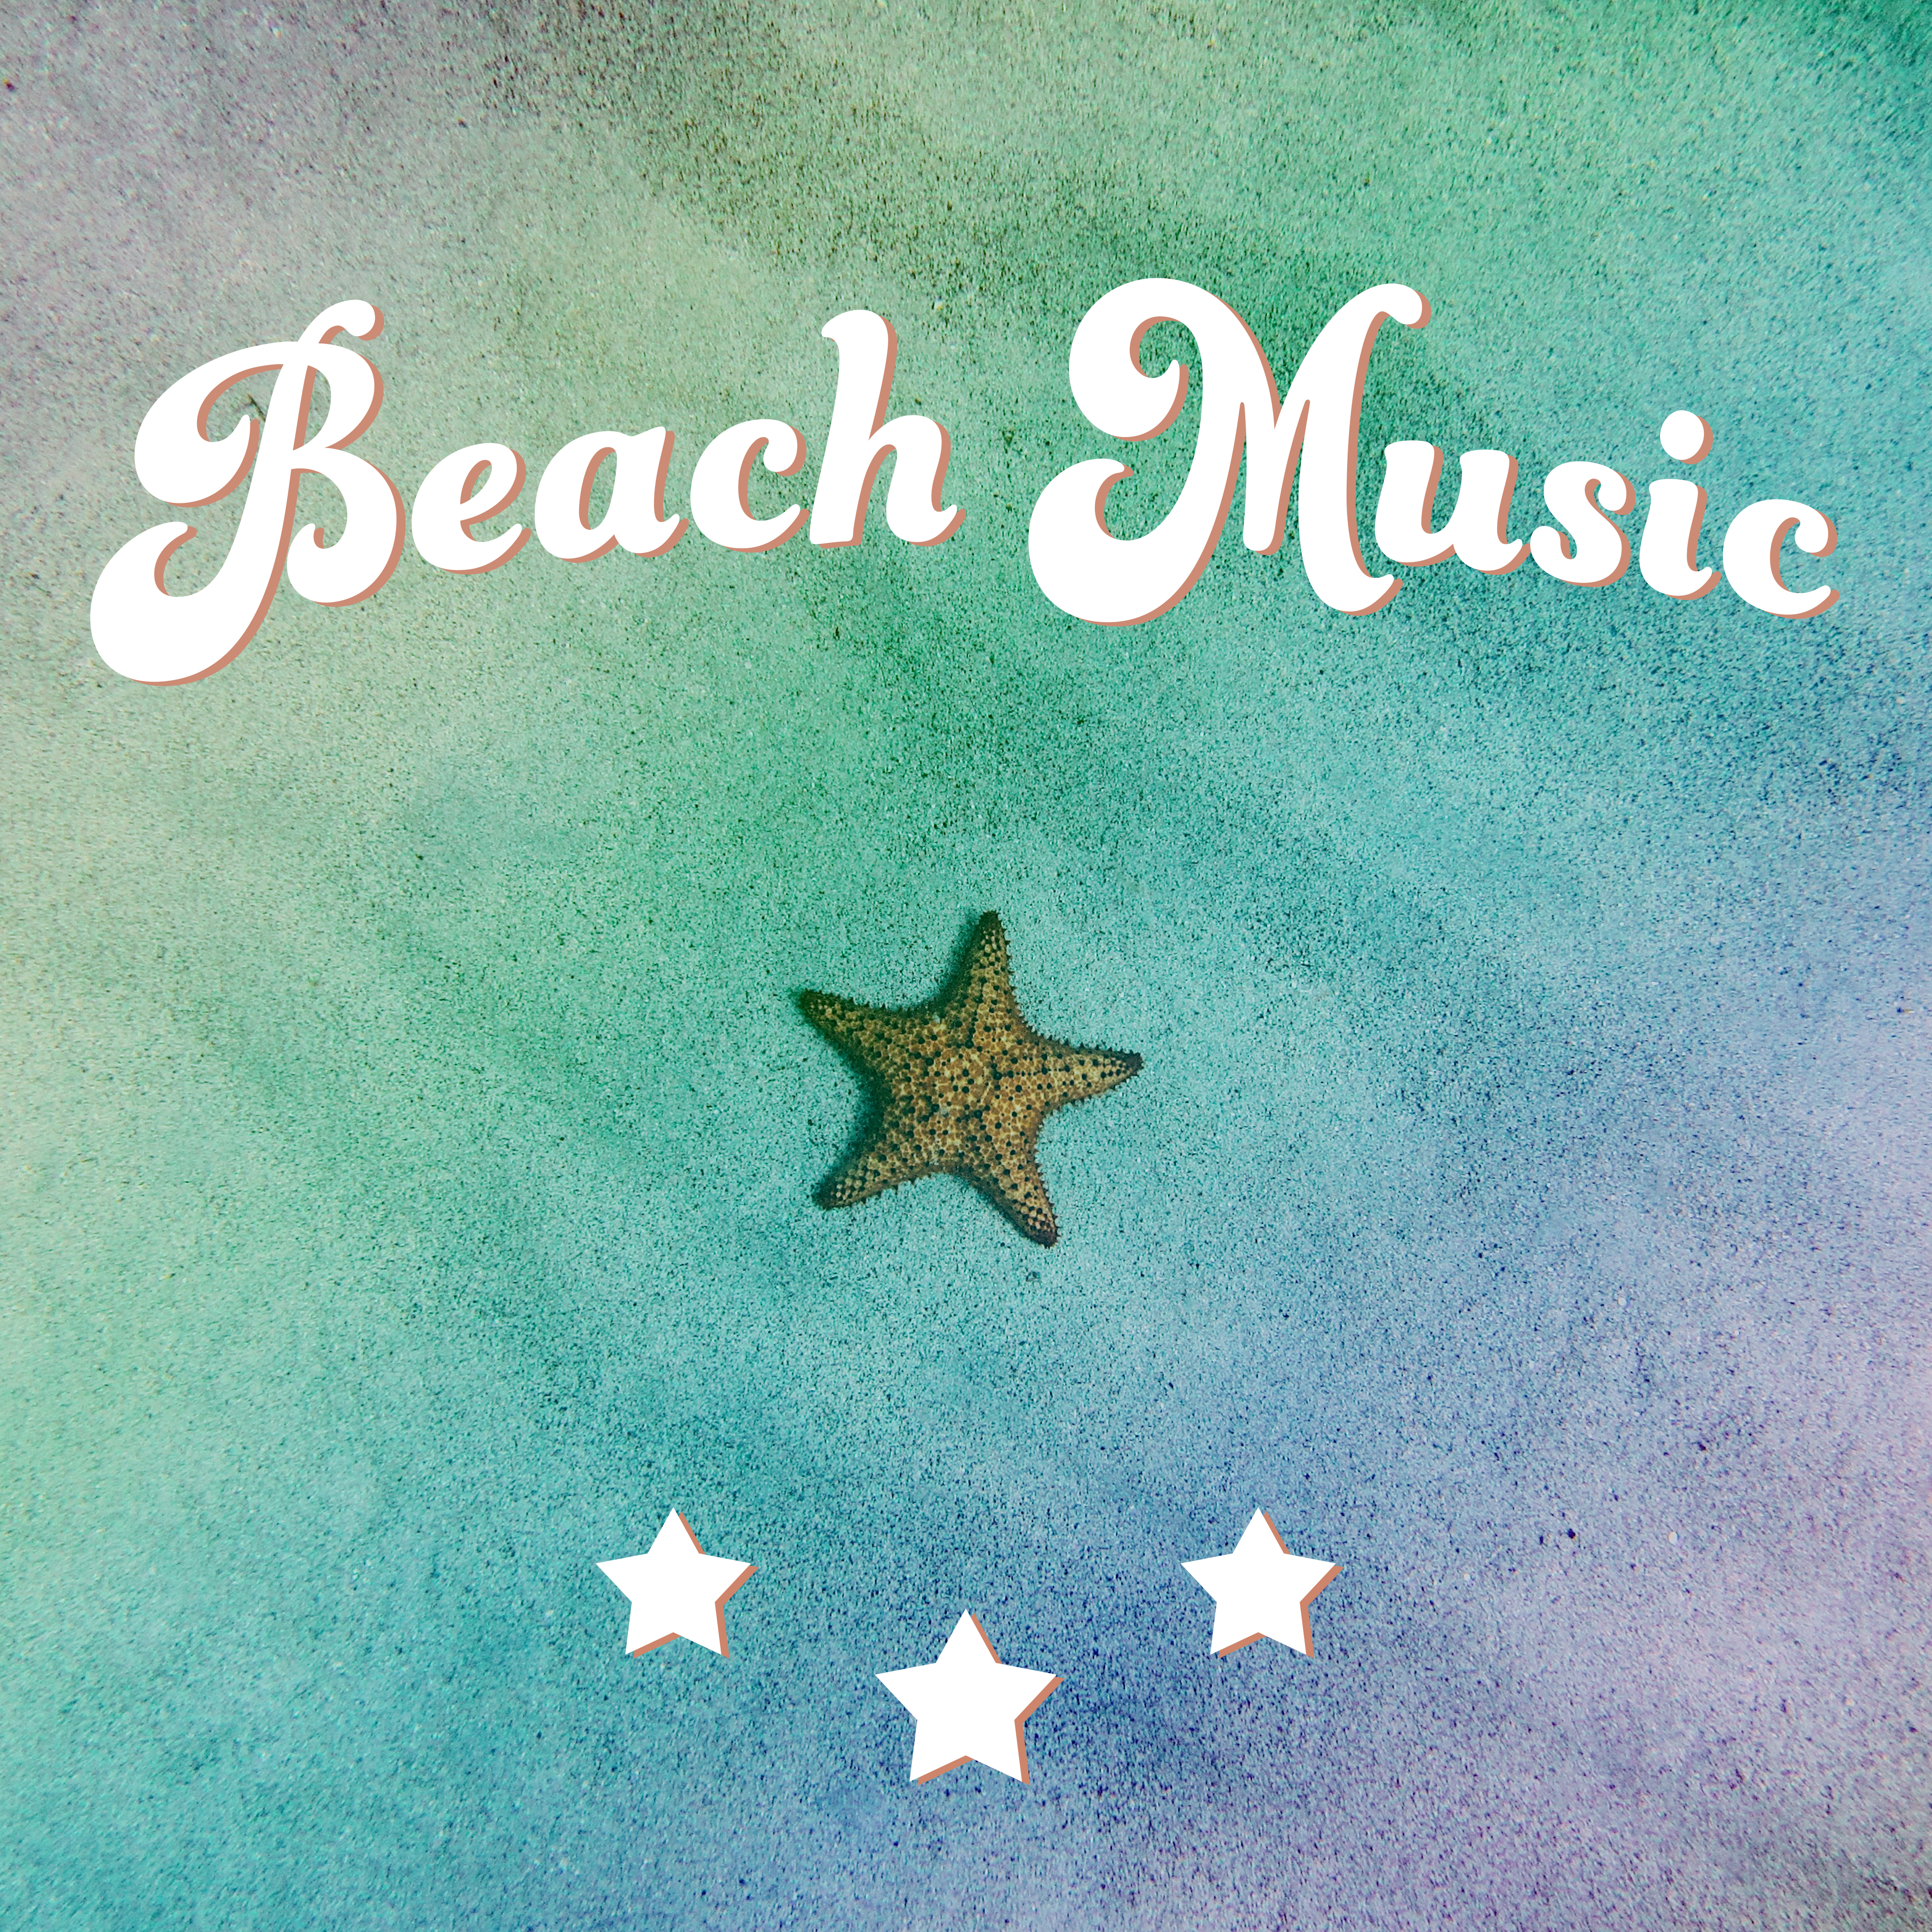 Beach Music – Ibiza Chill, Relax on the Beach, Pure Rest, Dance Music, Party Night, Chillout Lounge, Total Relaxation